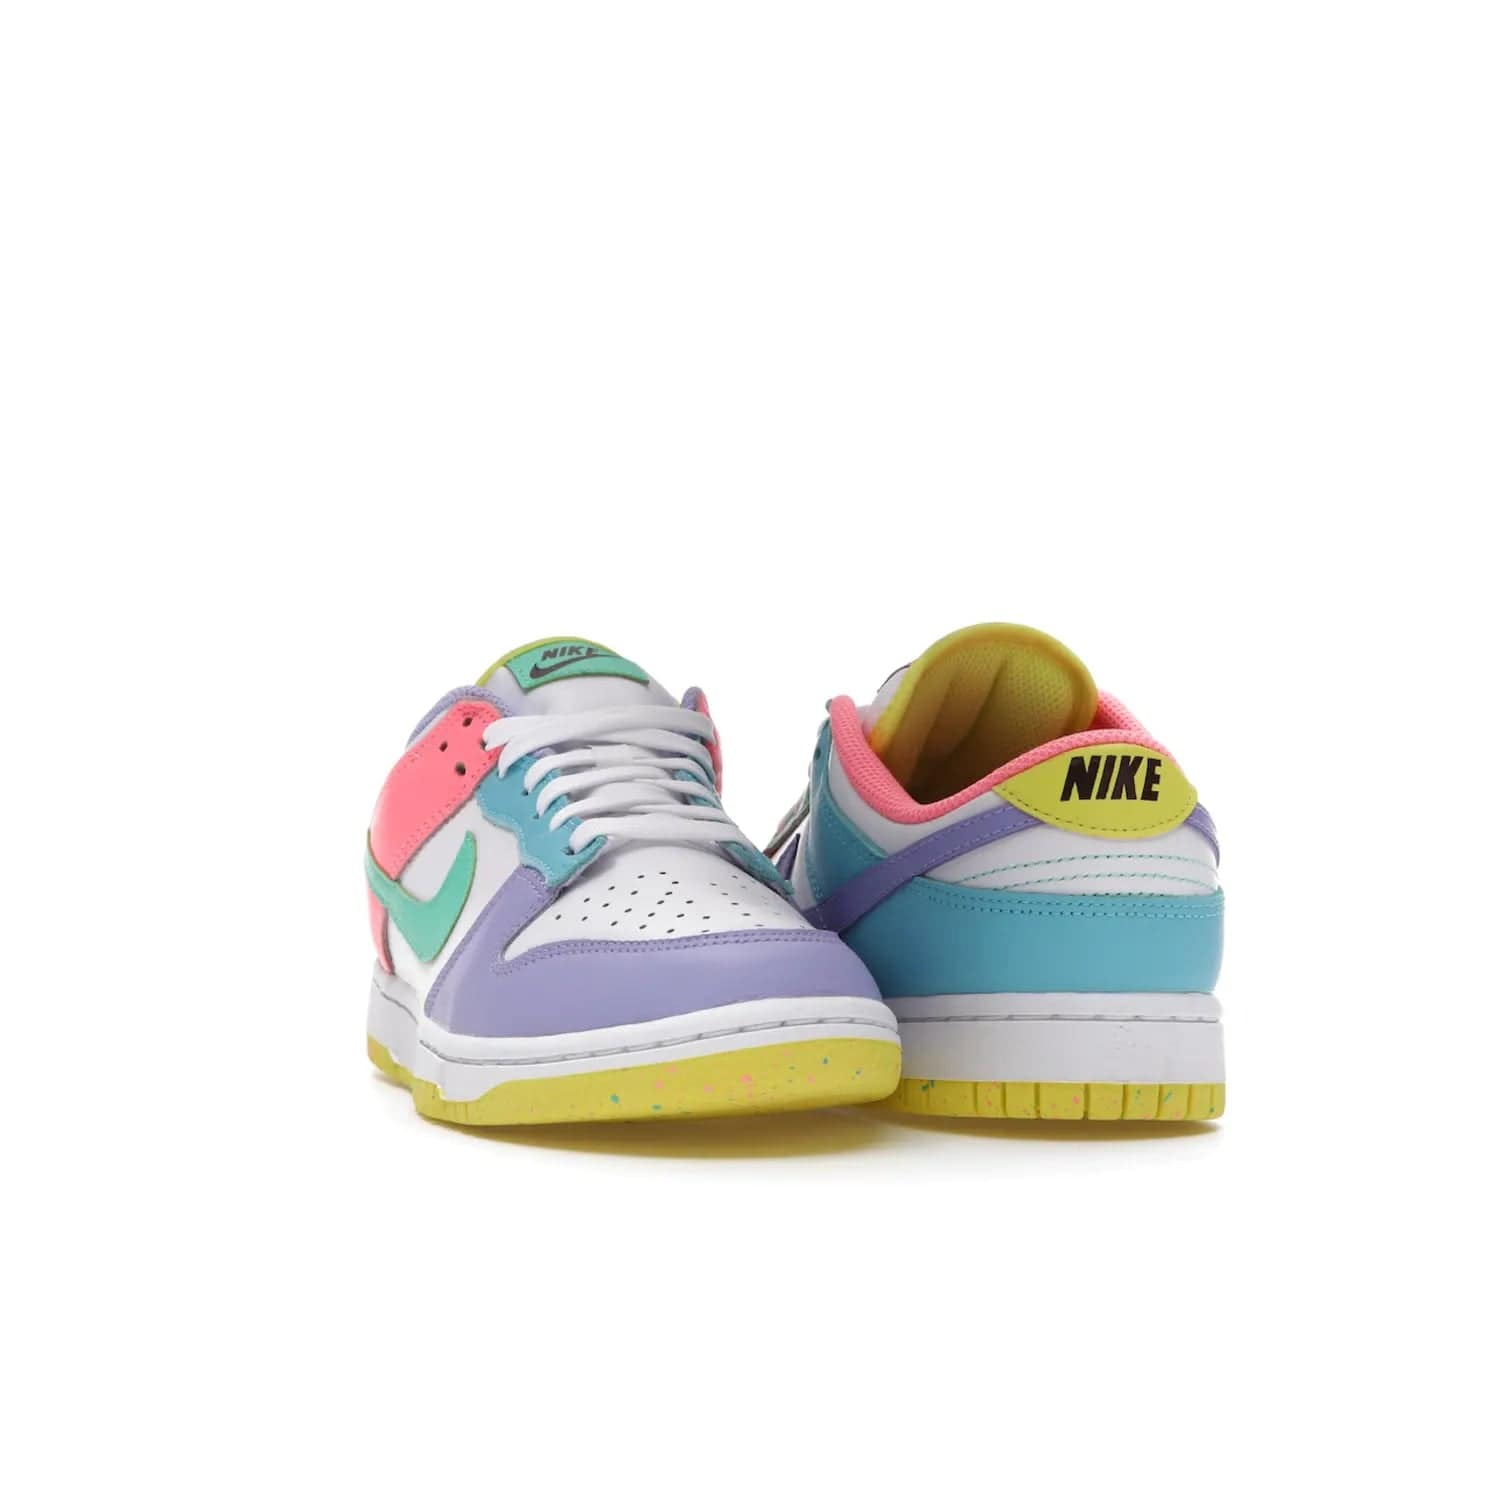 Nike Dunk Low SE Easter Candy (Women's) - Image 8 - Only at www.BallersClubKickz.com - UP
The Nike Dunk Low SE Easter Candy (Women's) brings a stylish touch to any outfit with its white leather upper, colorful accents, and multicolor speckle detailing. Shop now before they're gone.